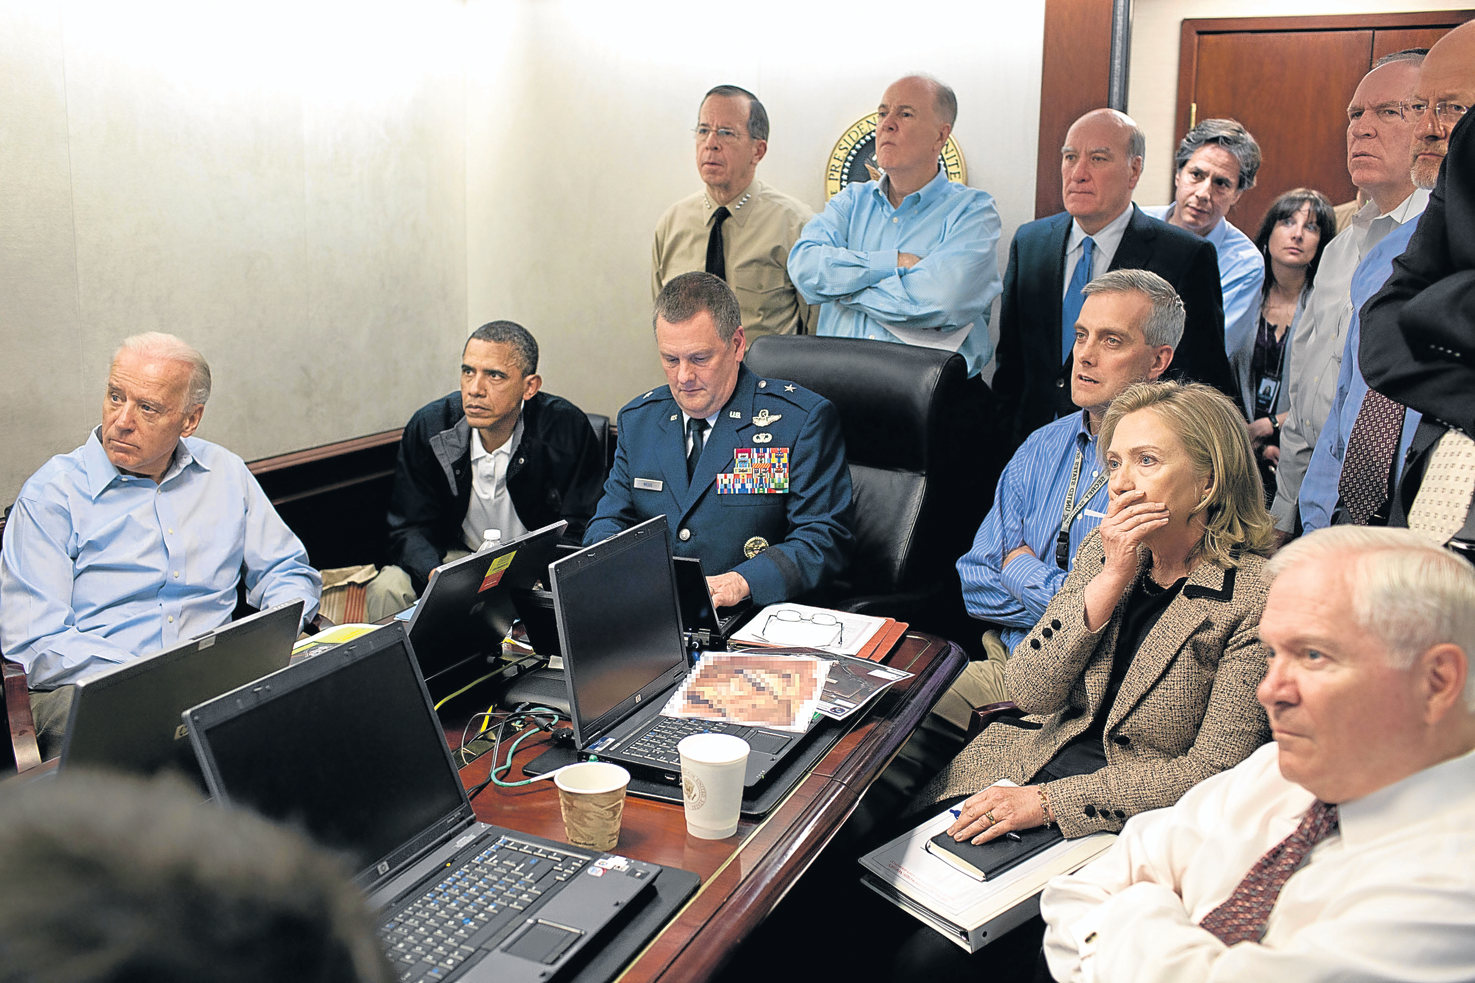 Barack Obama and Government staff watch as commandos conduct a raid, which ends with the killing of Osama bin Laden. 2011